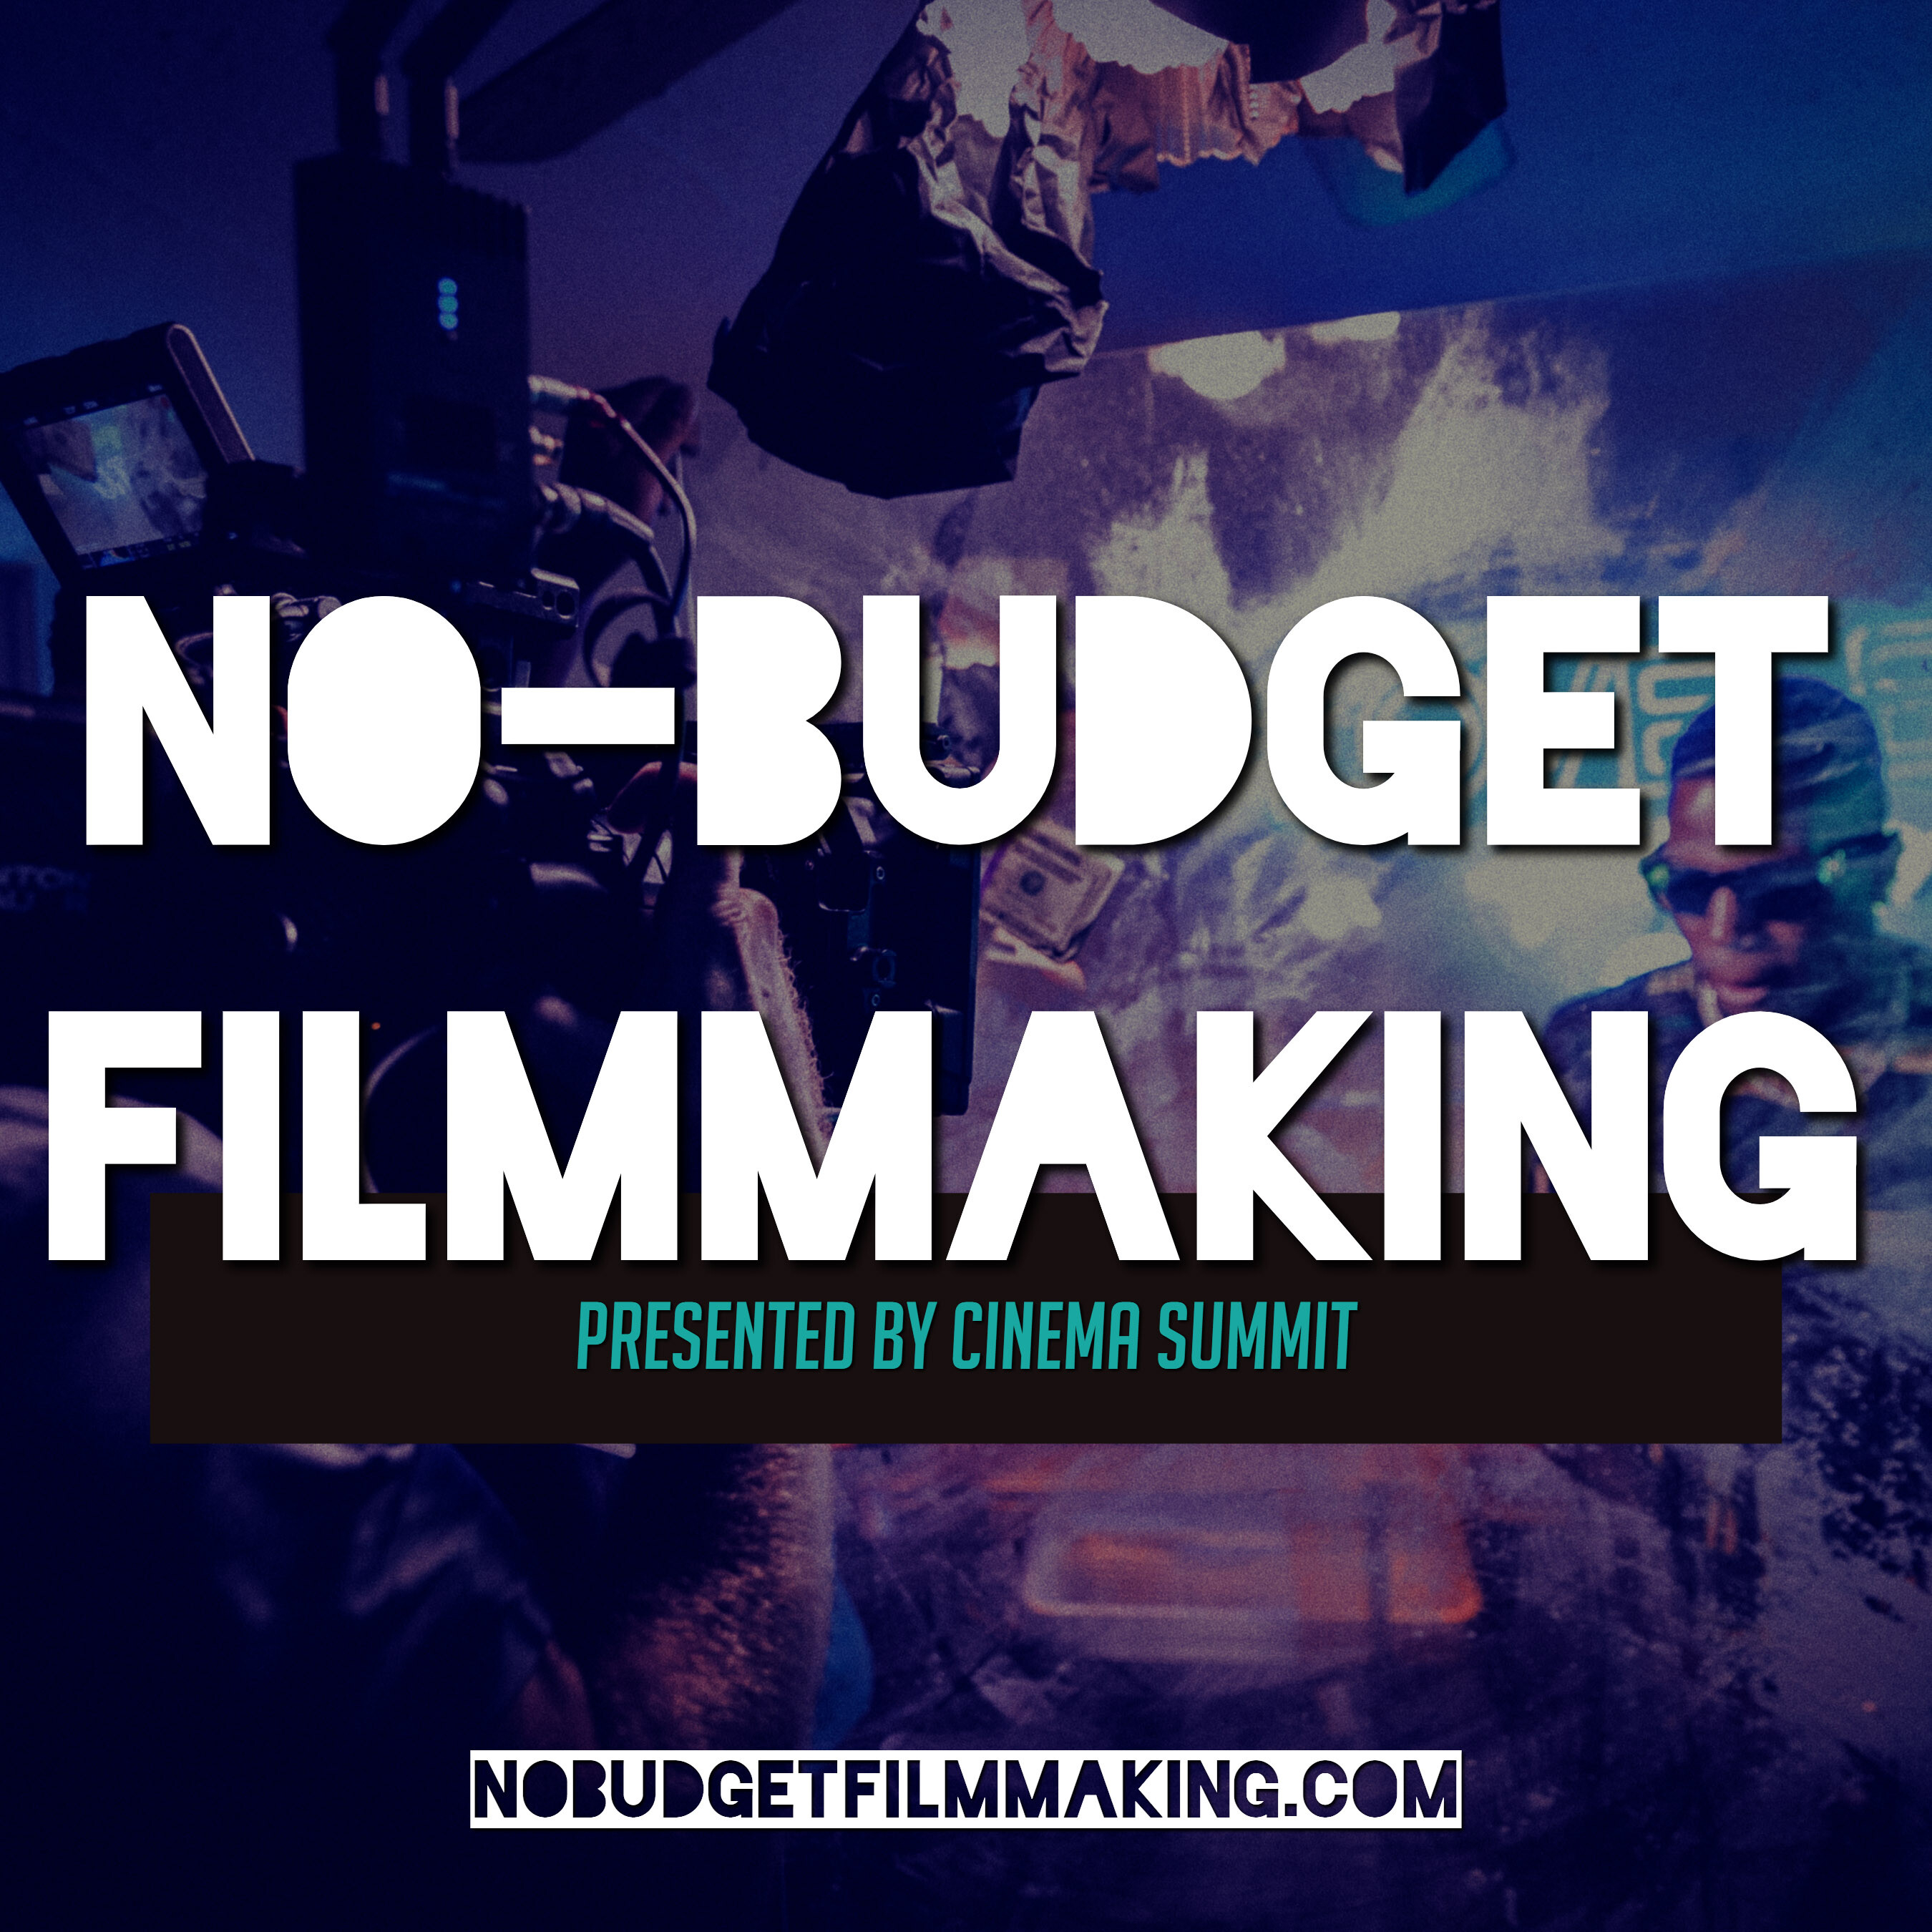 NBF 033: Artistic or Money Maker? What Kind of Film for Your First Feature